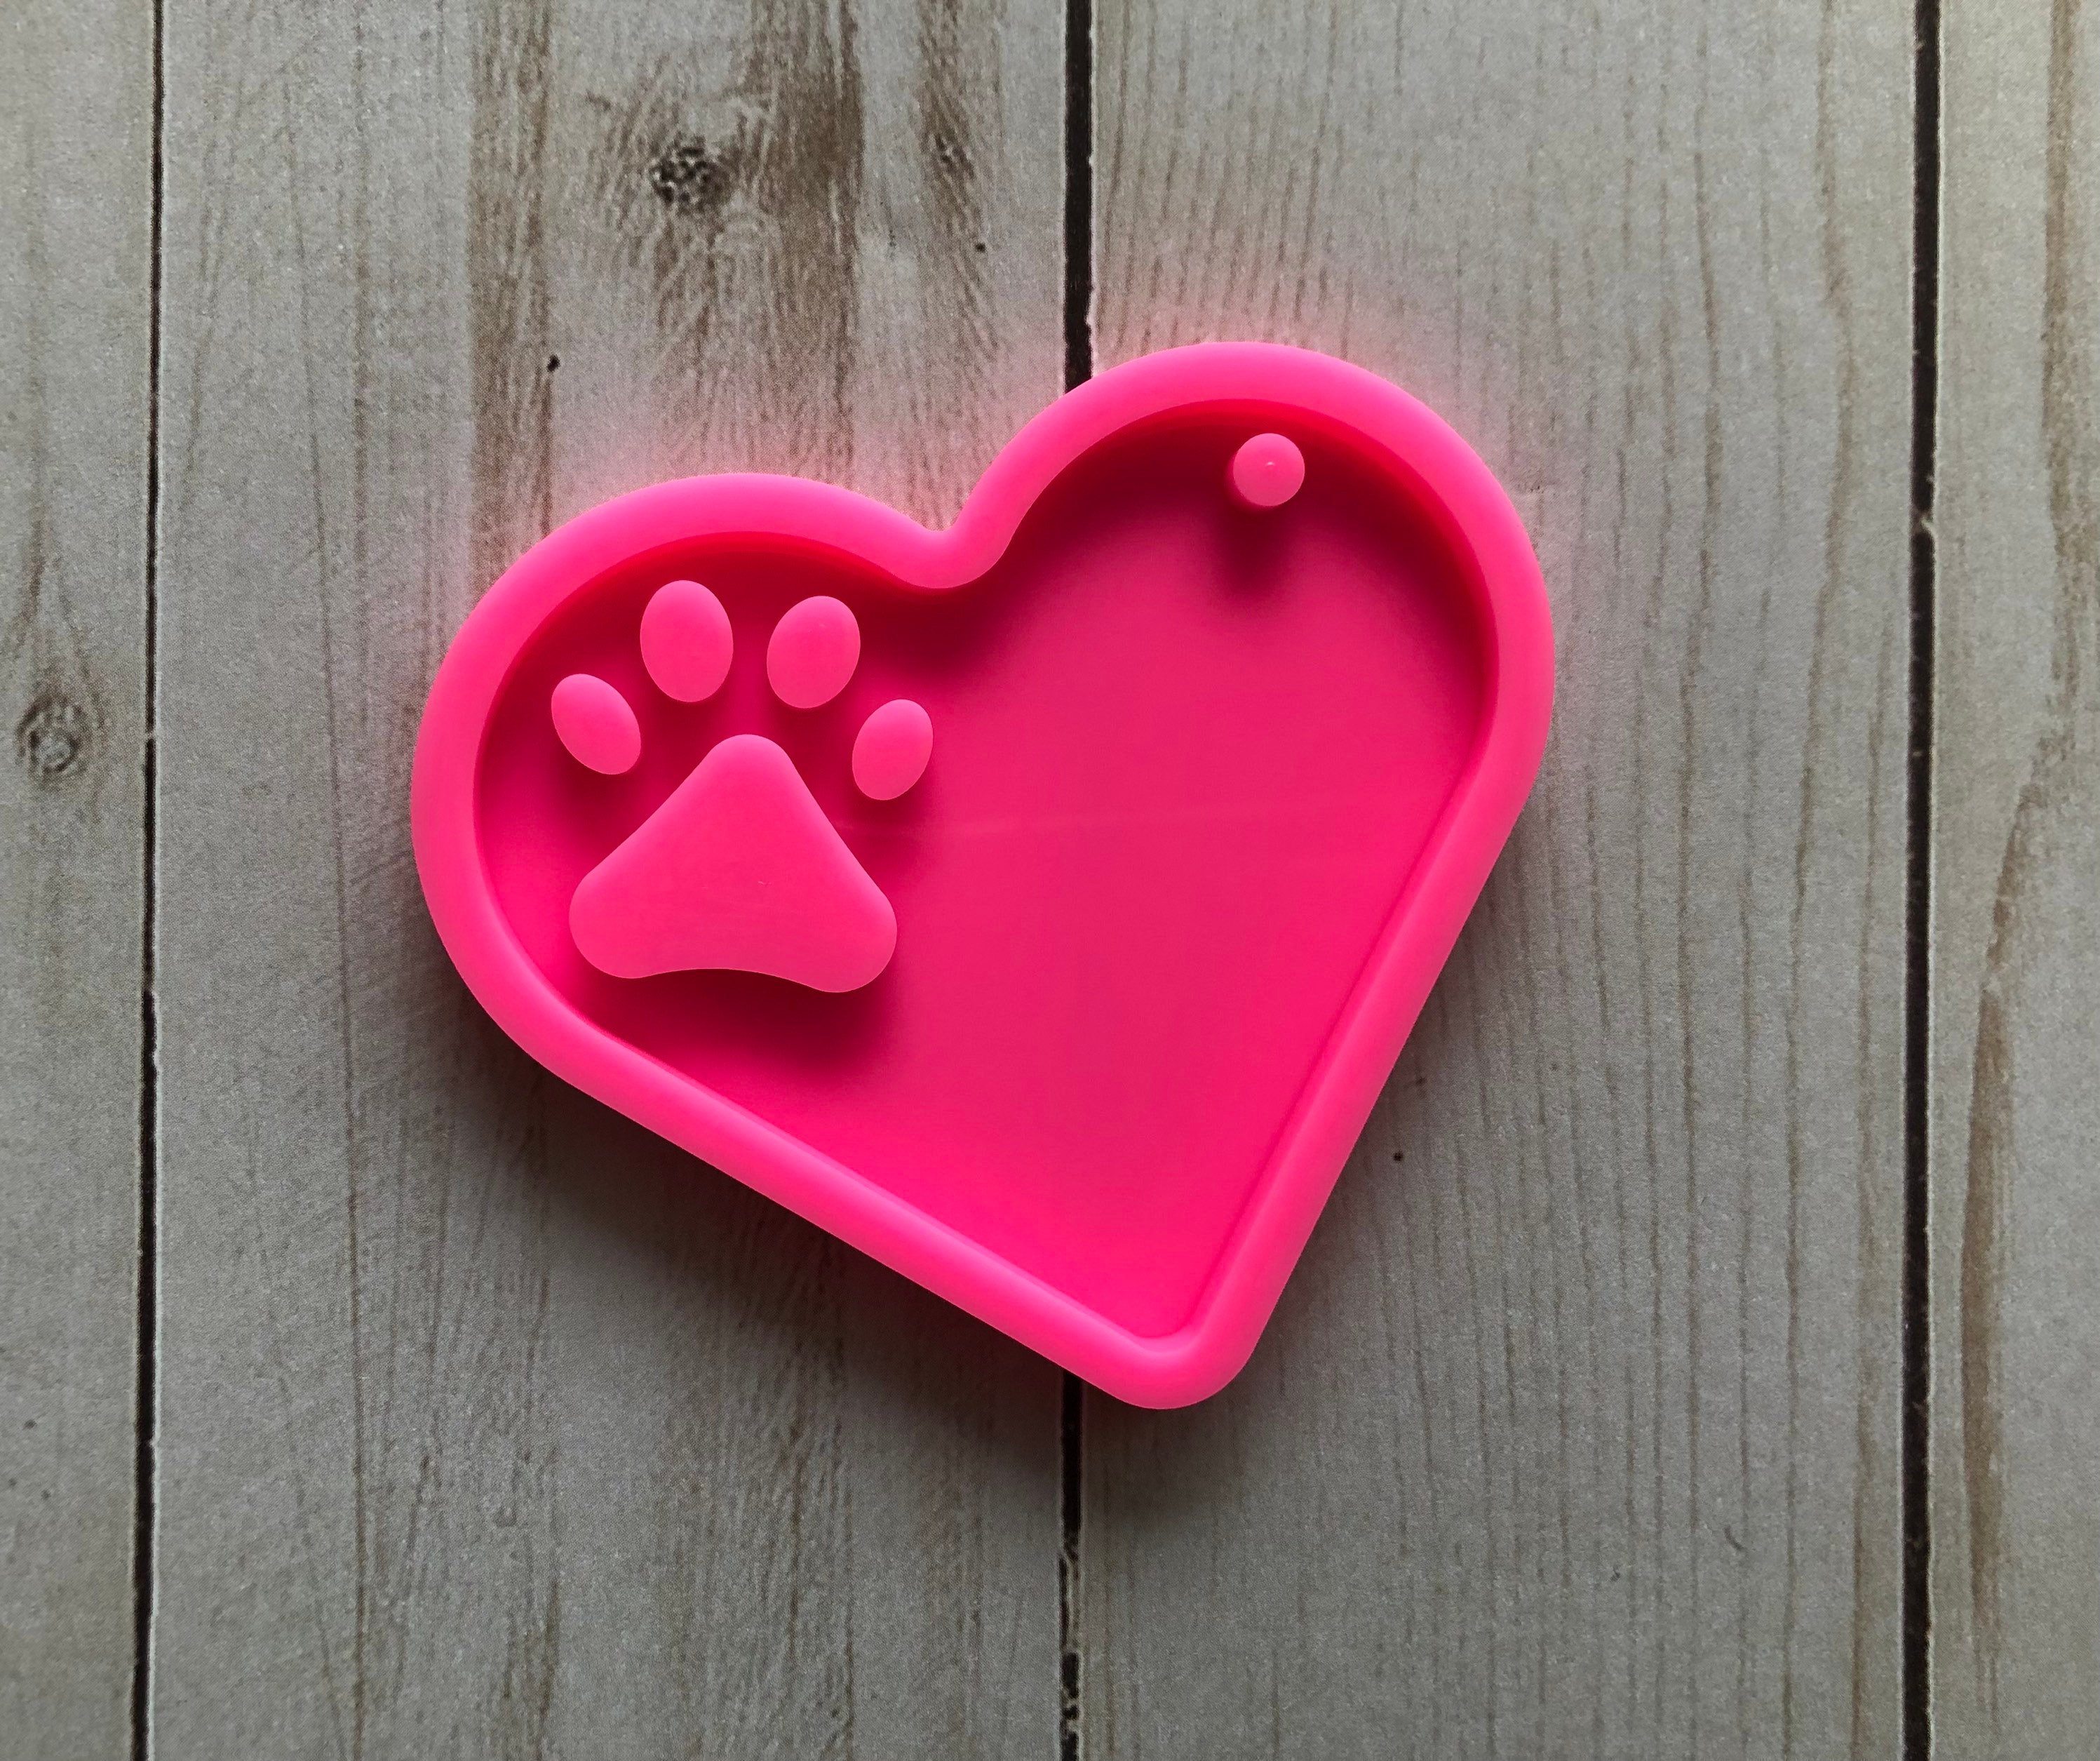  AMZTOART 3pc Glossy Resin Silicone Paw Print Molds DIY Making  Keychain, Heart with Paw Cutout Epoxy Mold with 10PC Key  Ring(DY0129+DY0292+DY0404) : Arts, Crafts & Sewing